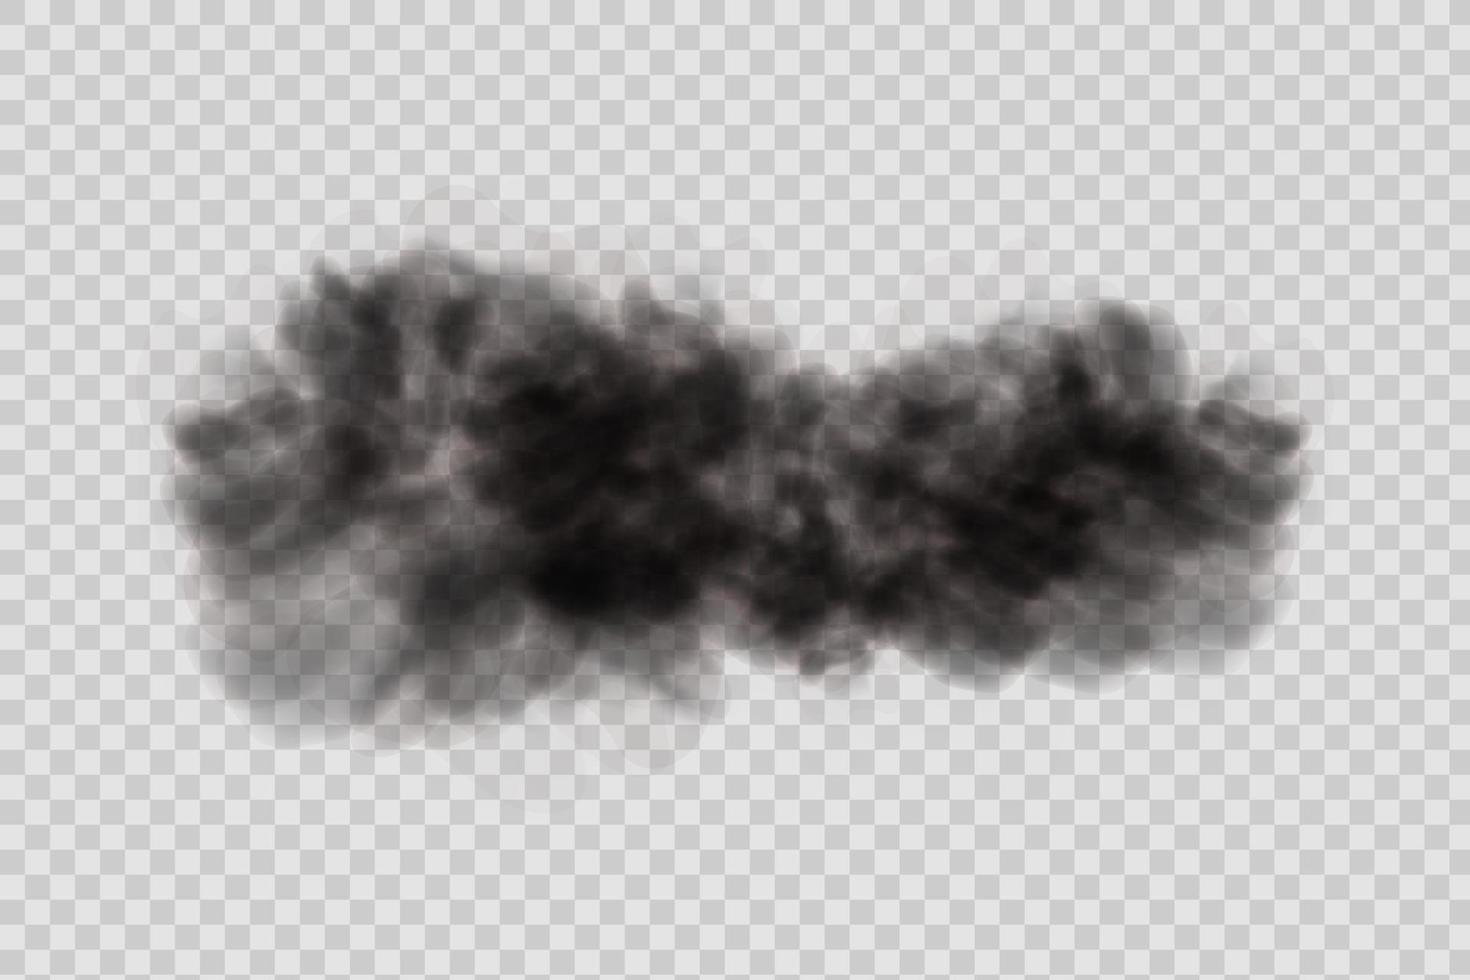 Black dust,clouds and fog. vector